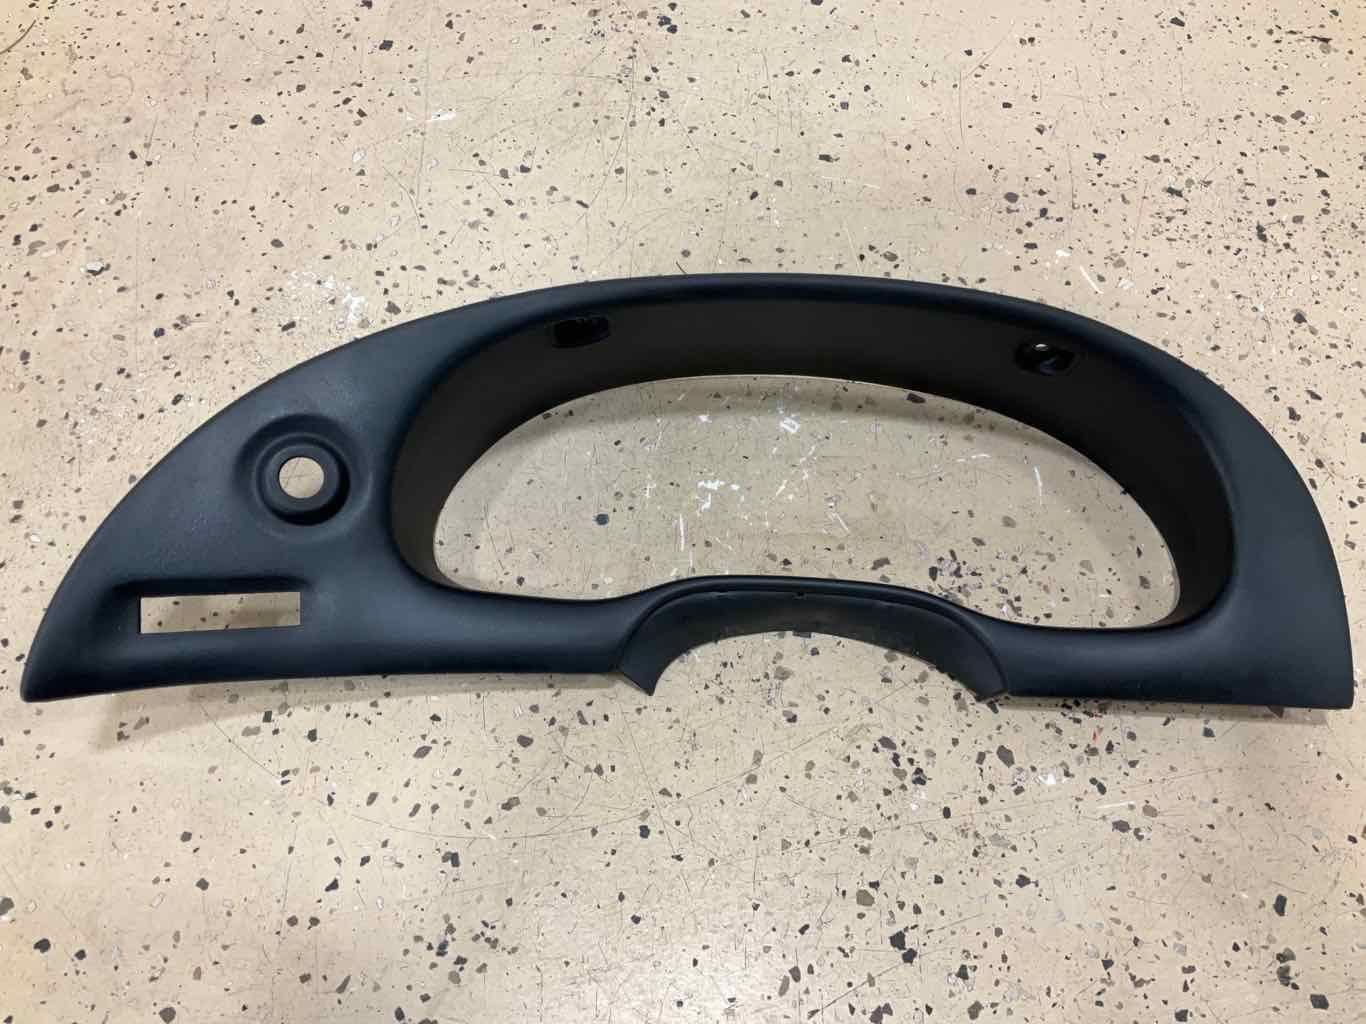 96-98 Ford Mustang Speedometer Bezel Trim with Headlight/Defrost Switch